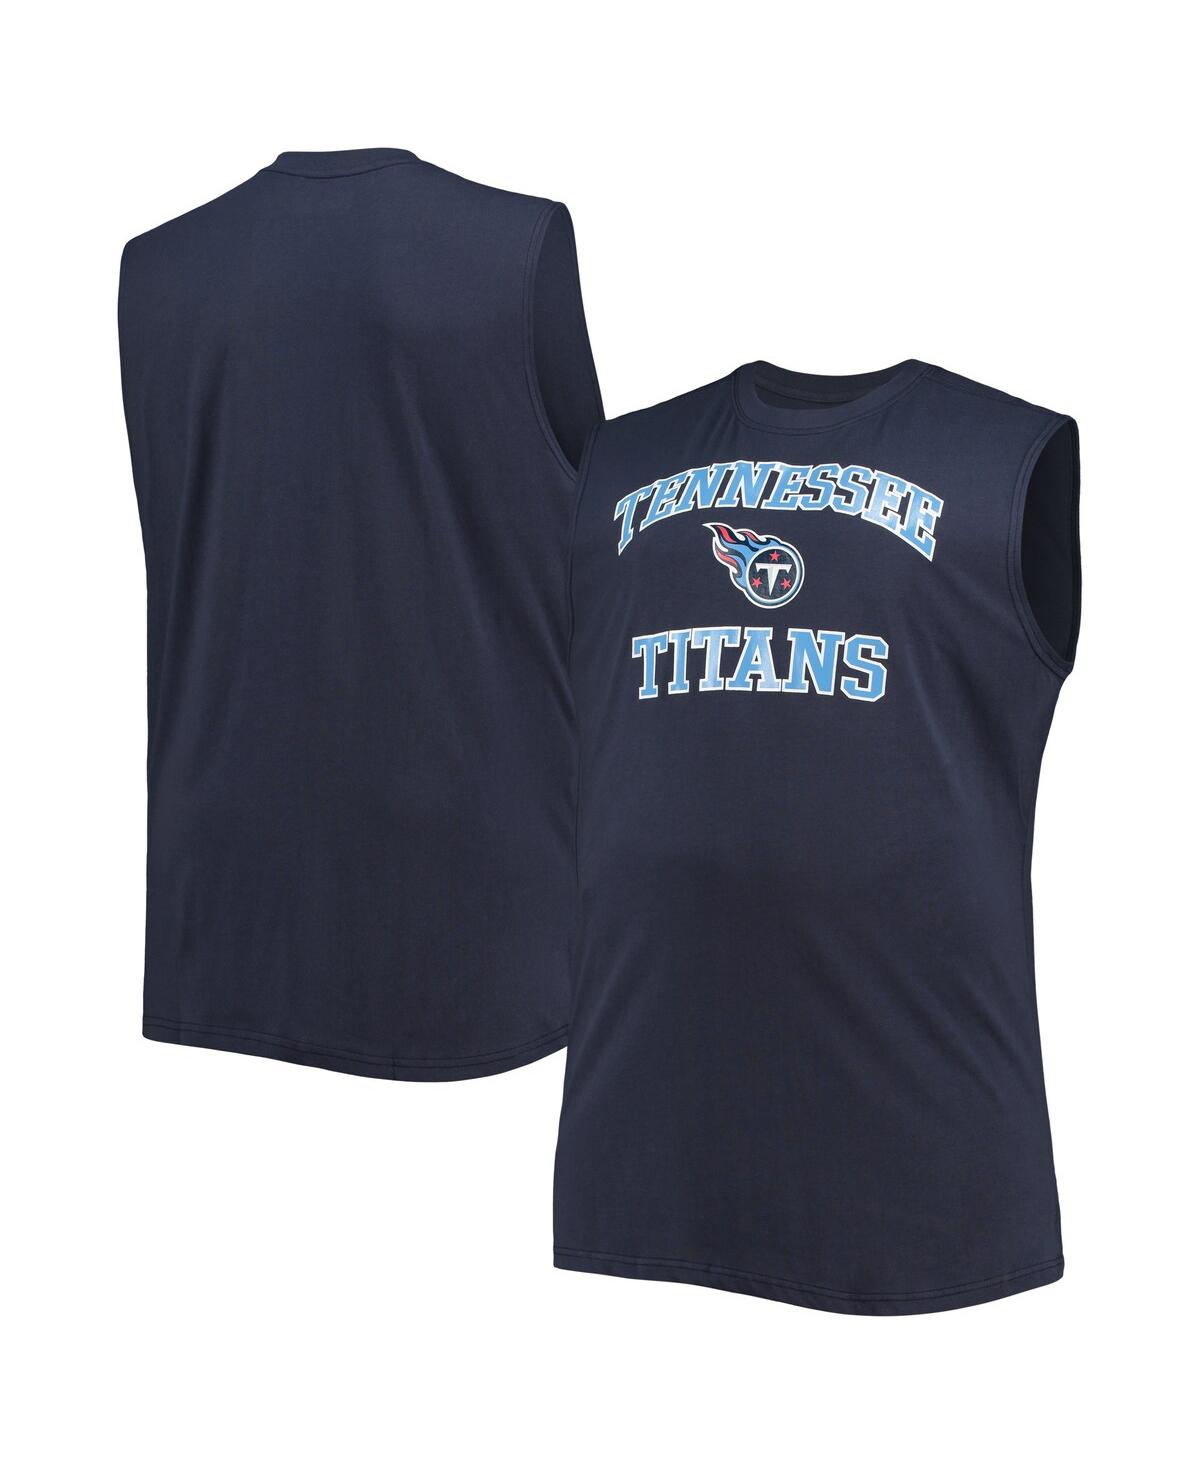 Fanatics Men's Navy Tennessee Titans Big And Tall Muscle Tank Top